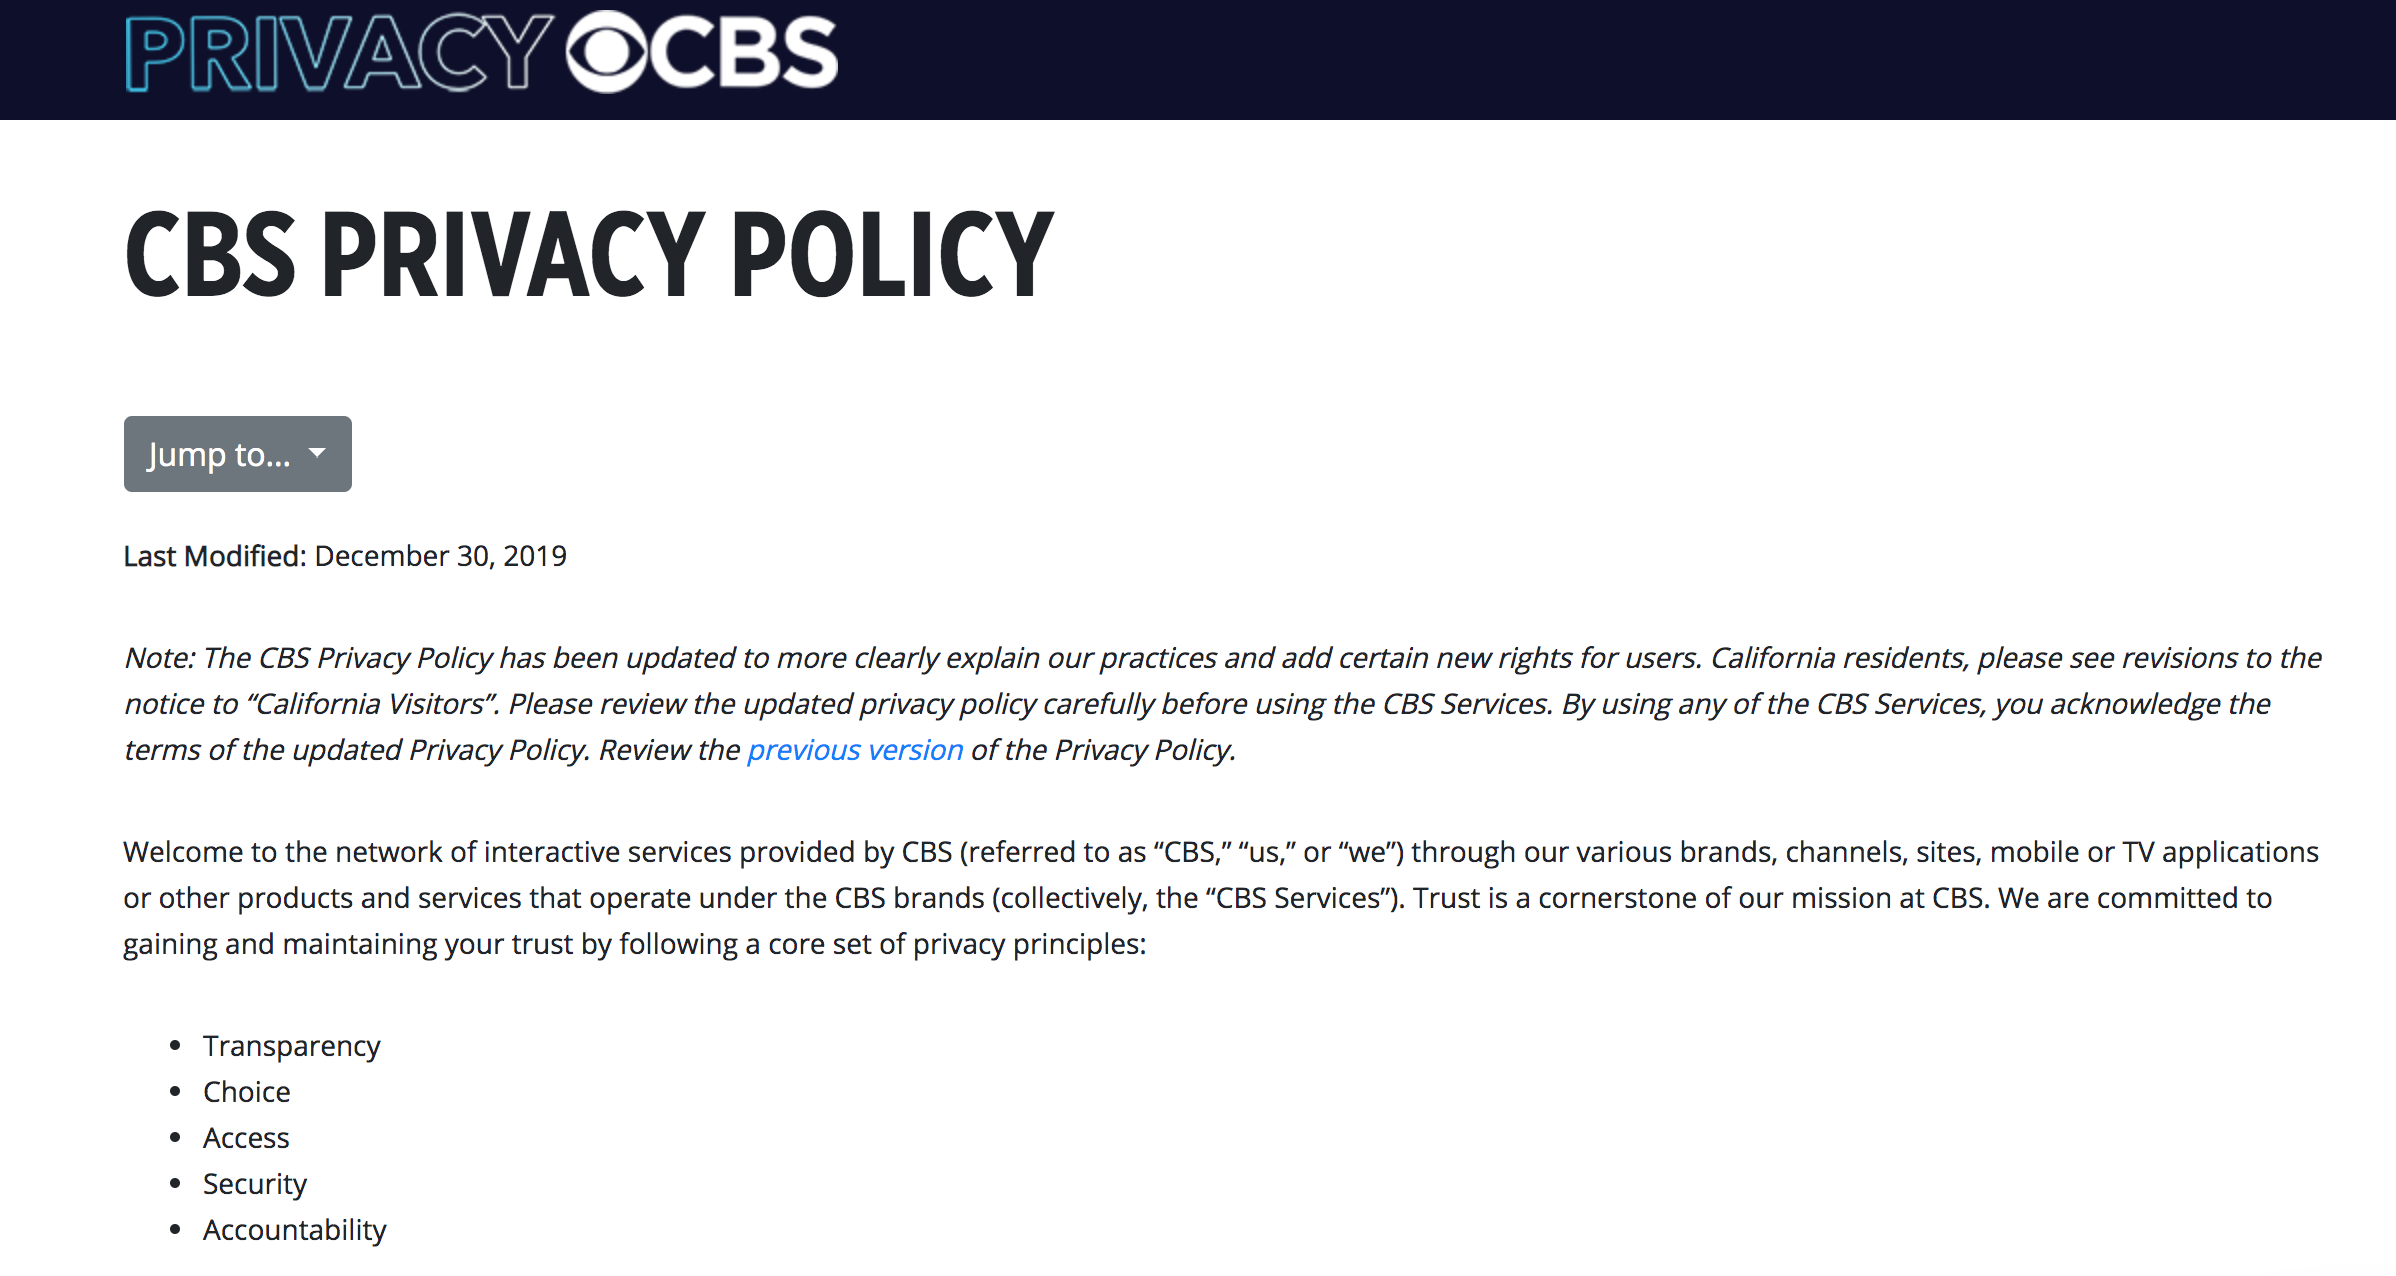 CBS's portal for their privacy policies